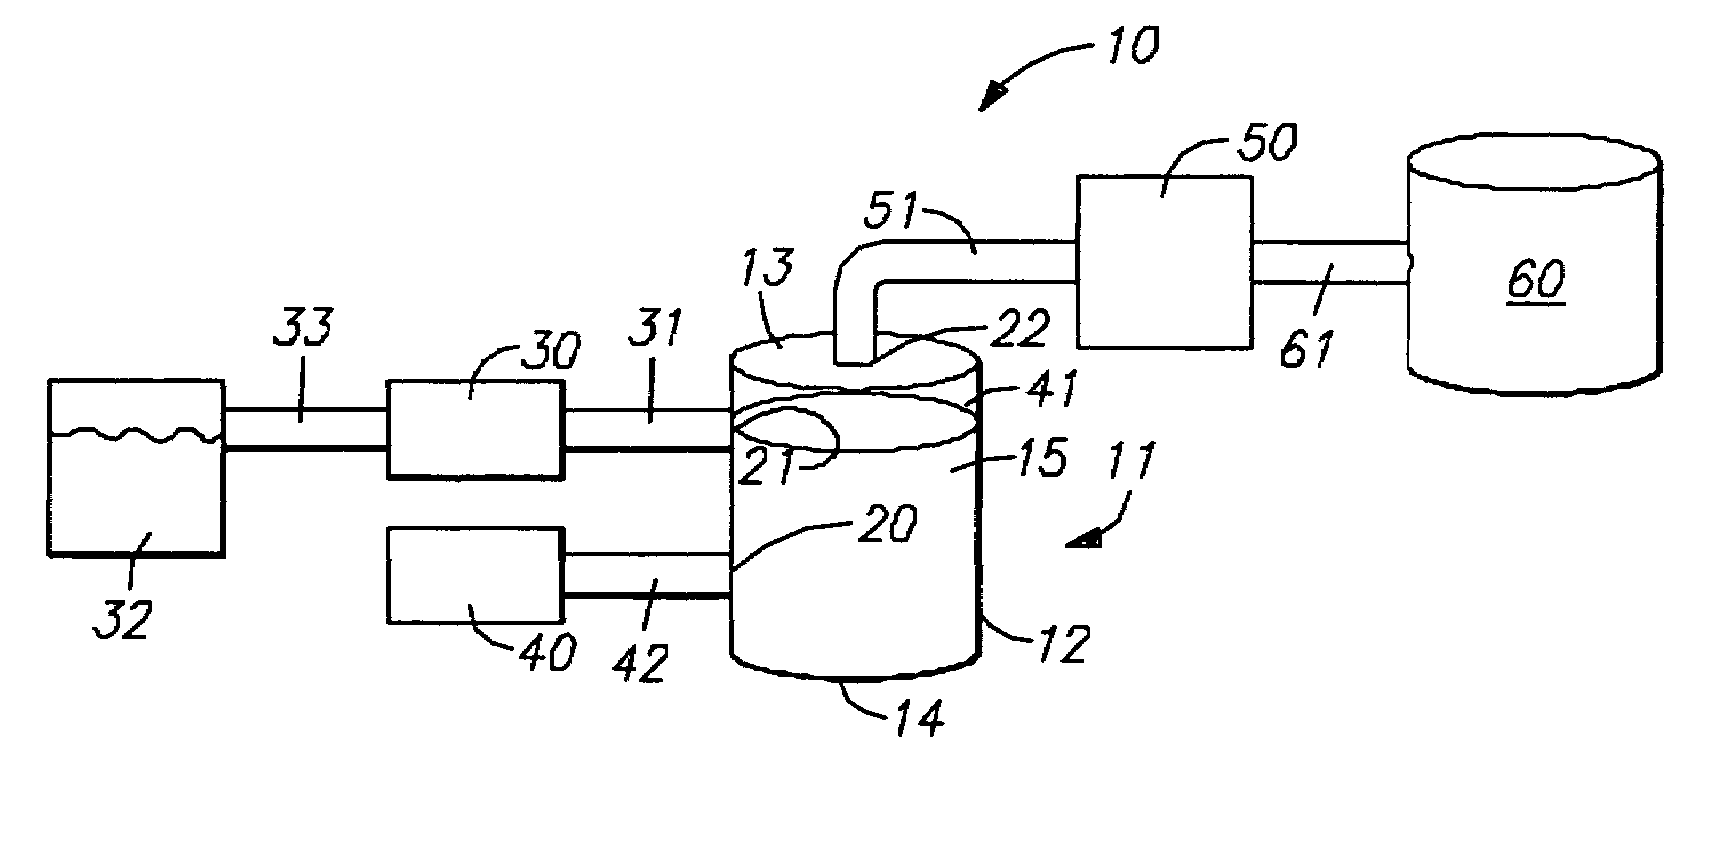 Method of producing a high pressure gas